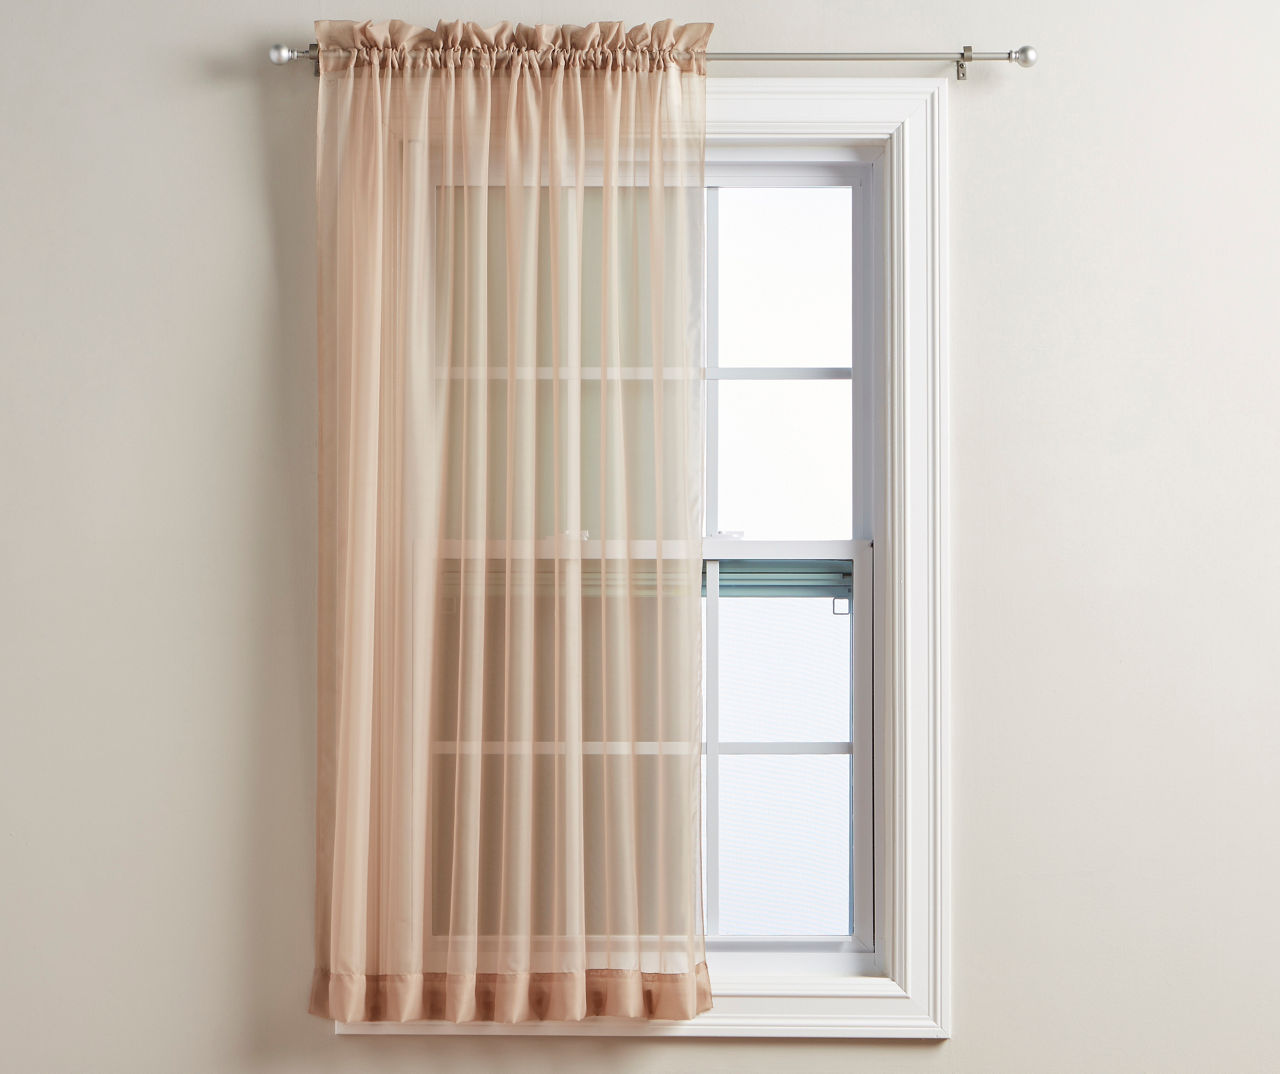 Taupe Voile Sheer Curtain Panel, (63")